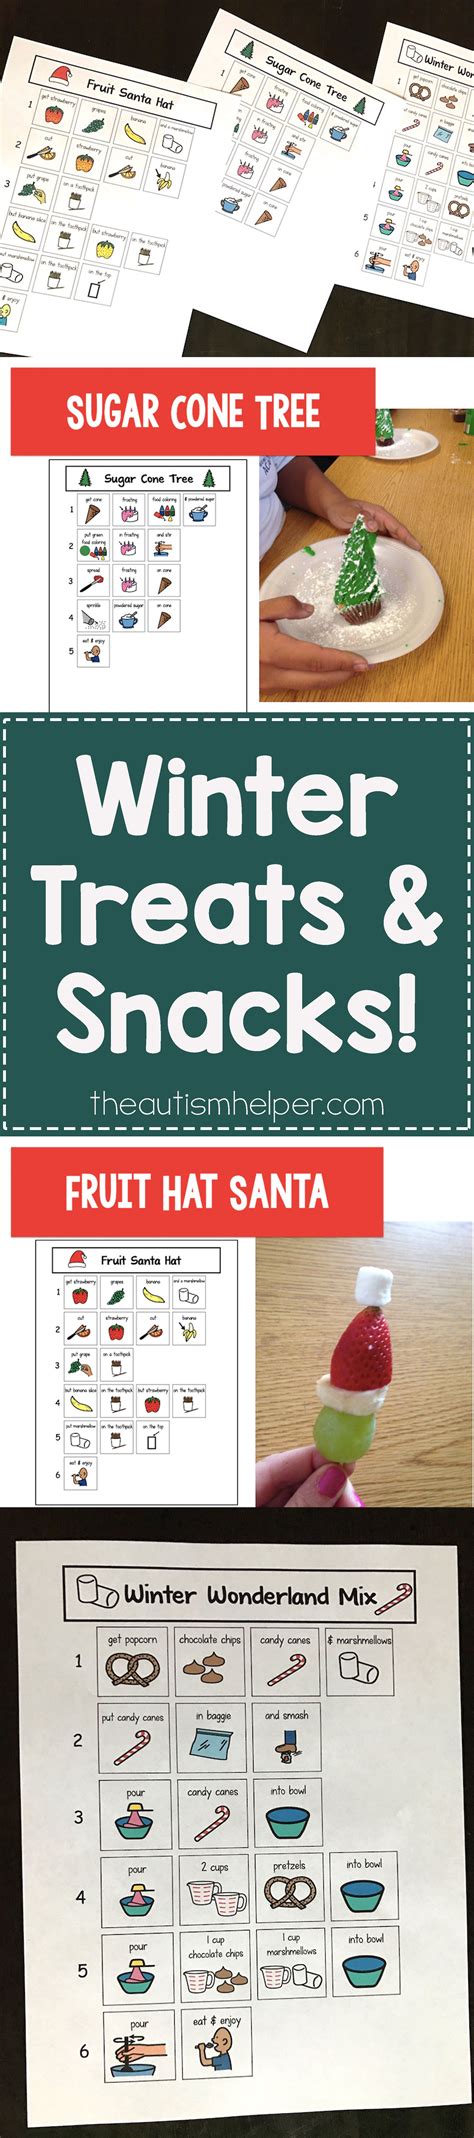 A high percentage of autistic children present zinc deficiencies due to restricted diets. Winter Treats and Snacks! - The Autism Helper | Special ...